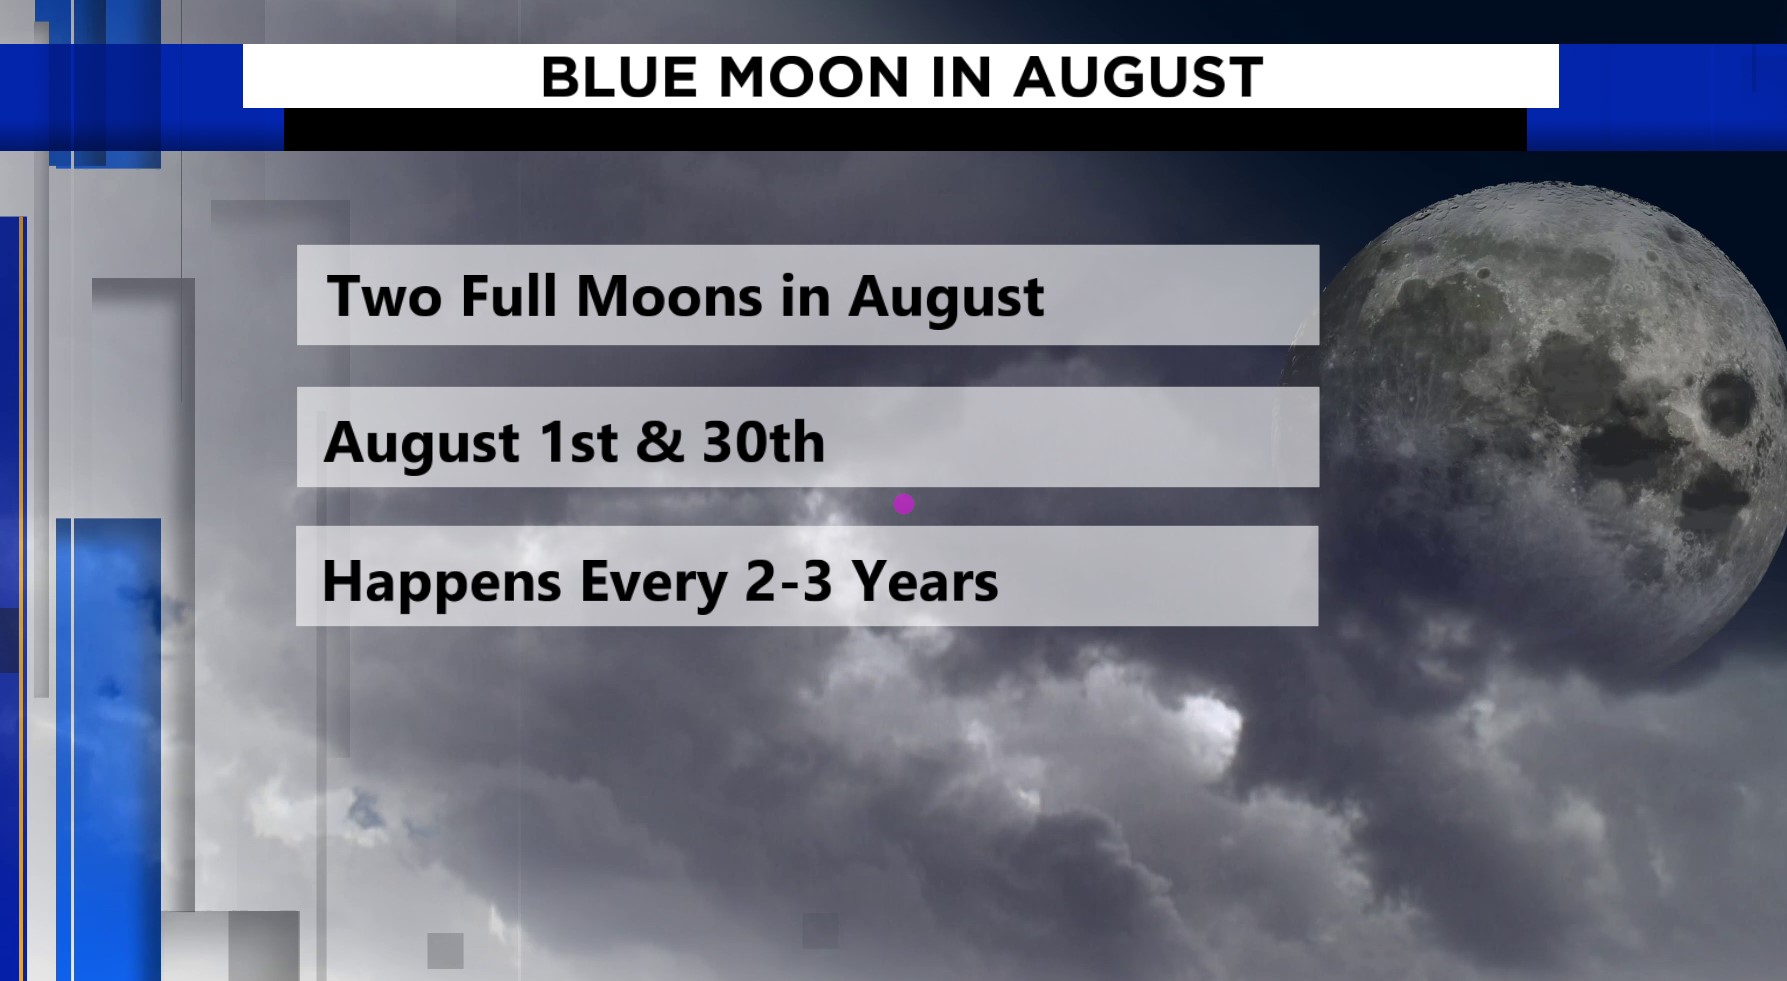 Earth will witness a Blue Moon in August